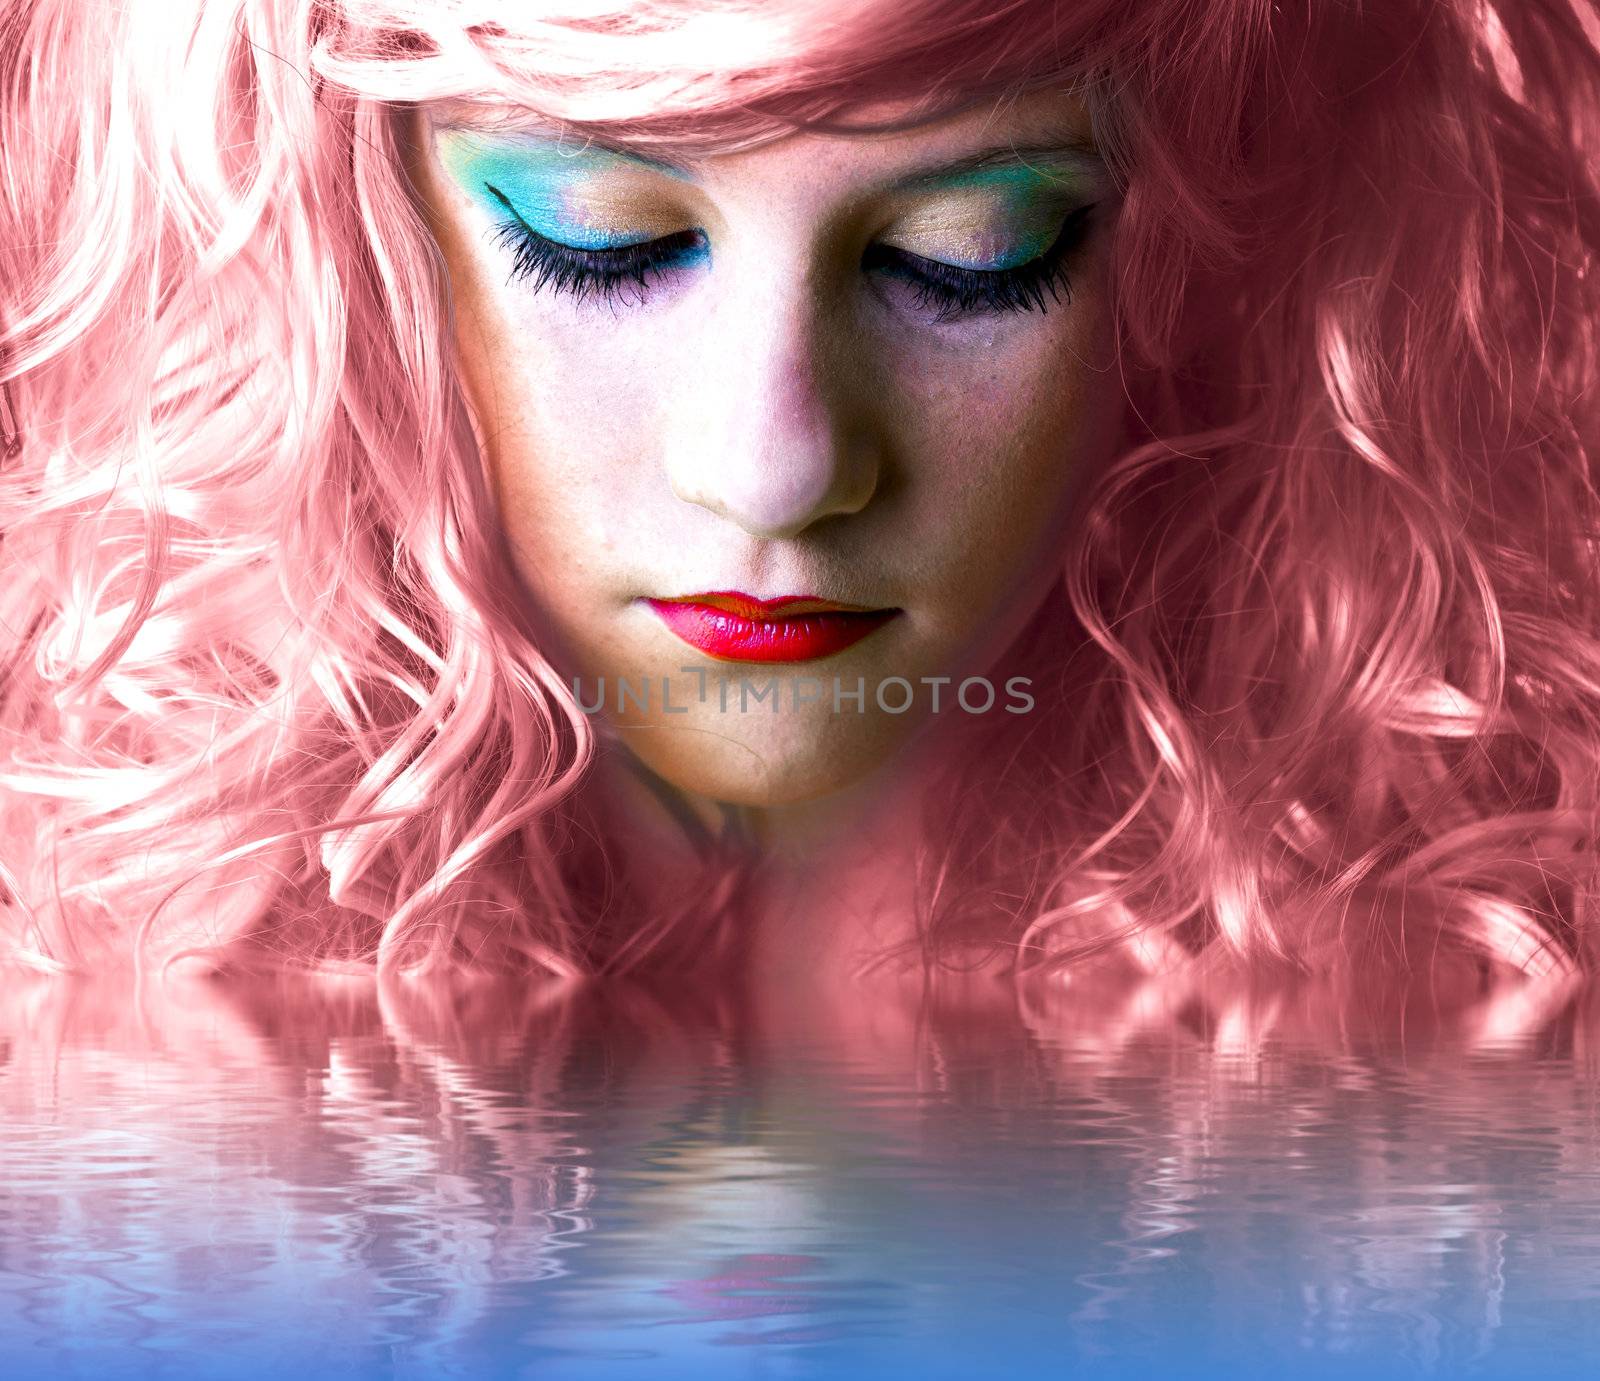 pink haired fairy girl in water reflection by FernandoCortes